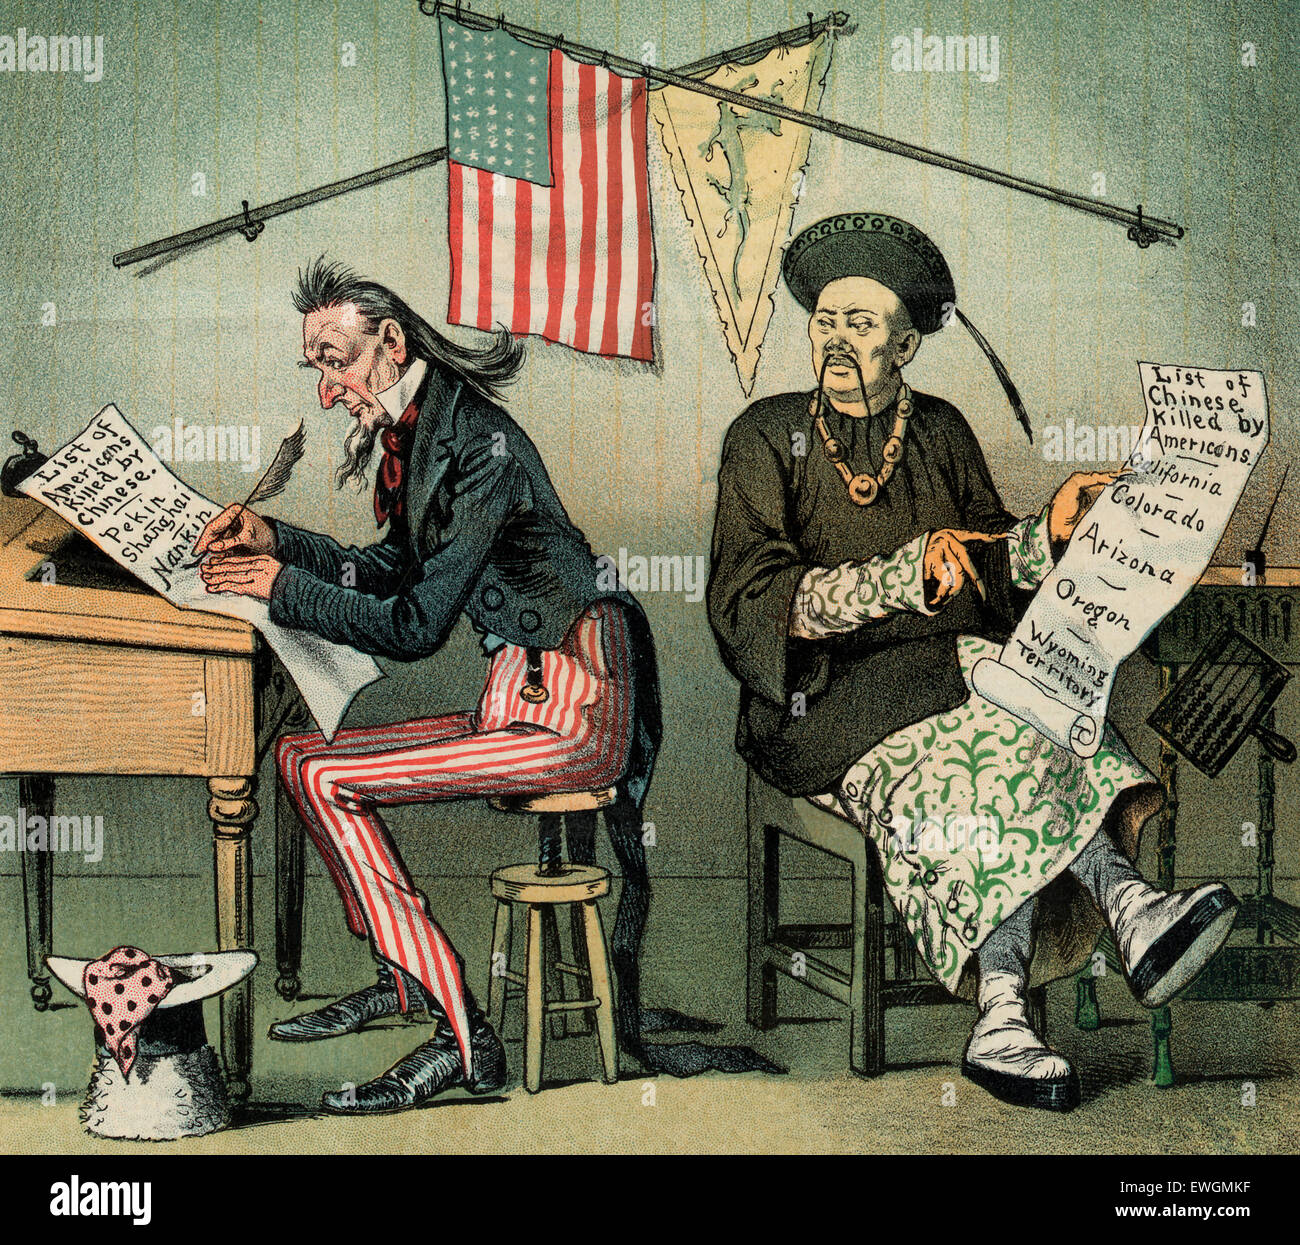 Keeping account - Illustration shows Uncle Sam preparing a list of places in China where 'Americans have been killed by Chinese' and a Chinese man preparing a list of places in America where 'Chinese [have been] killed by Americans' including the latest incident in 'Wyoming Territory'. Political cartoon, 1885 Stock Photo